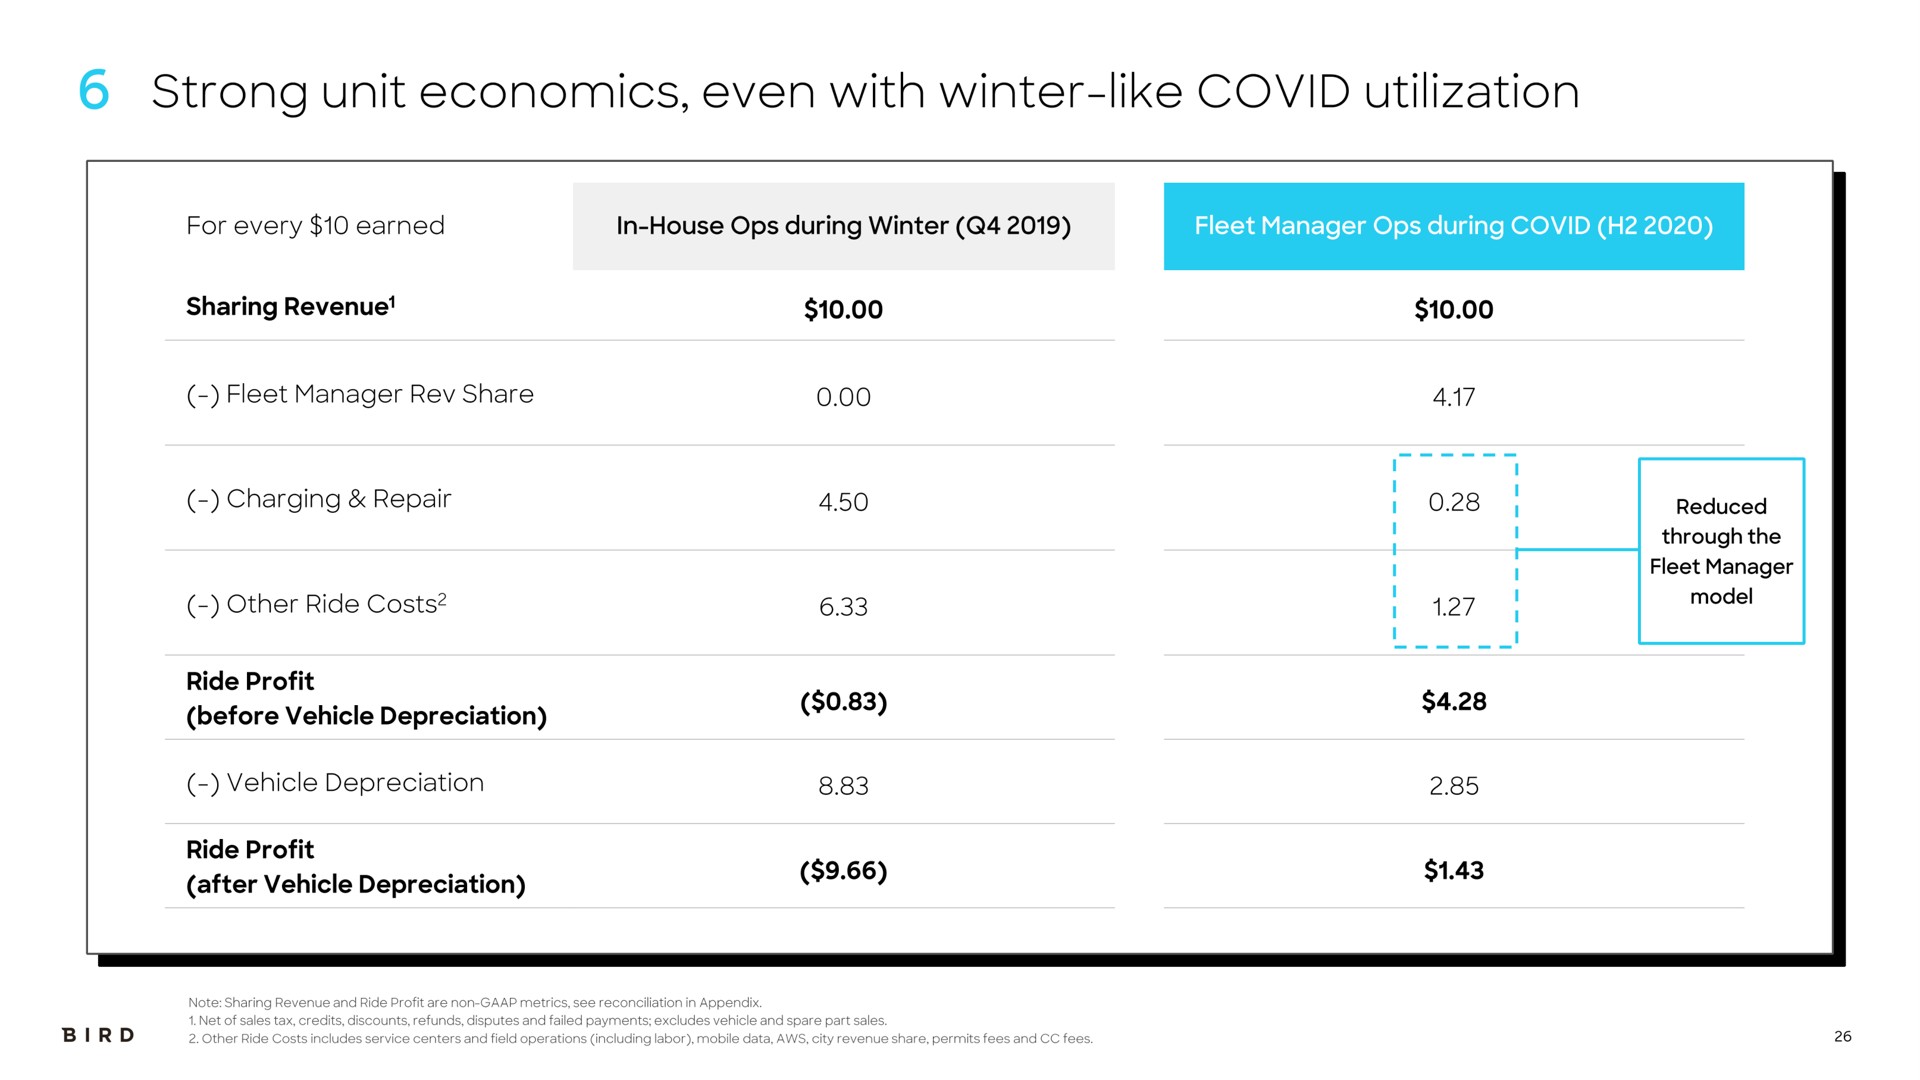 strong unit economics even with winter like covid utilization | Bird